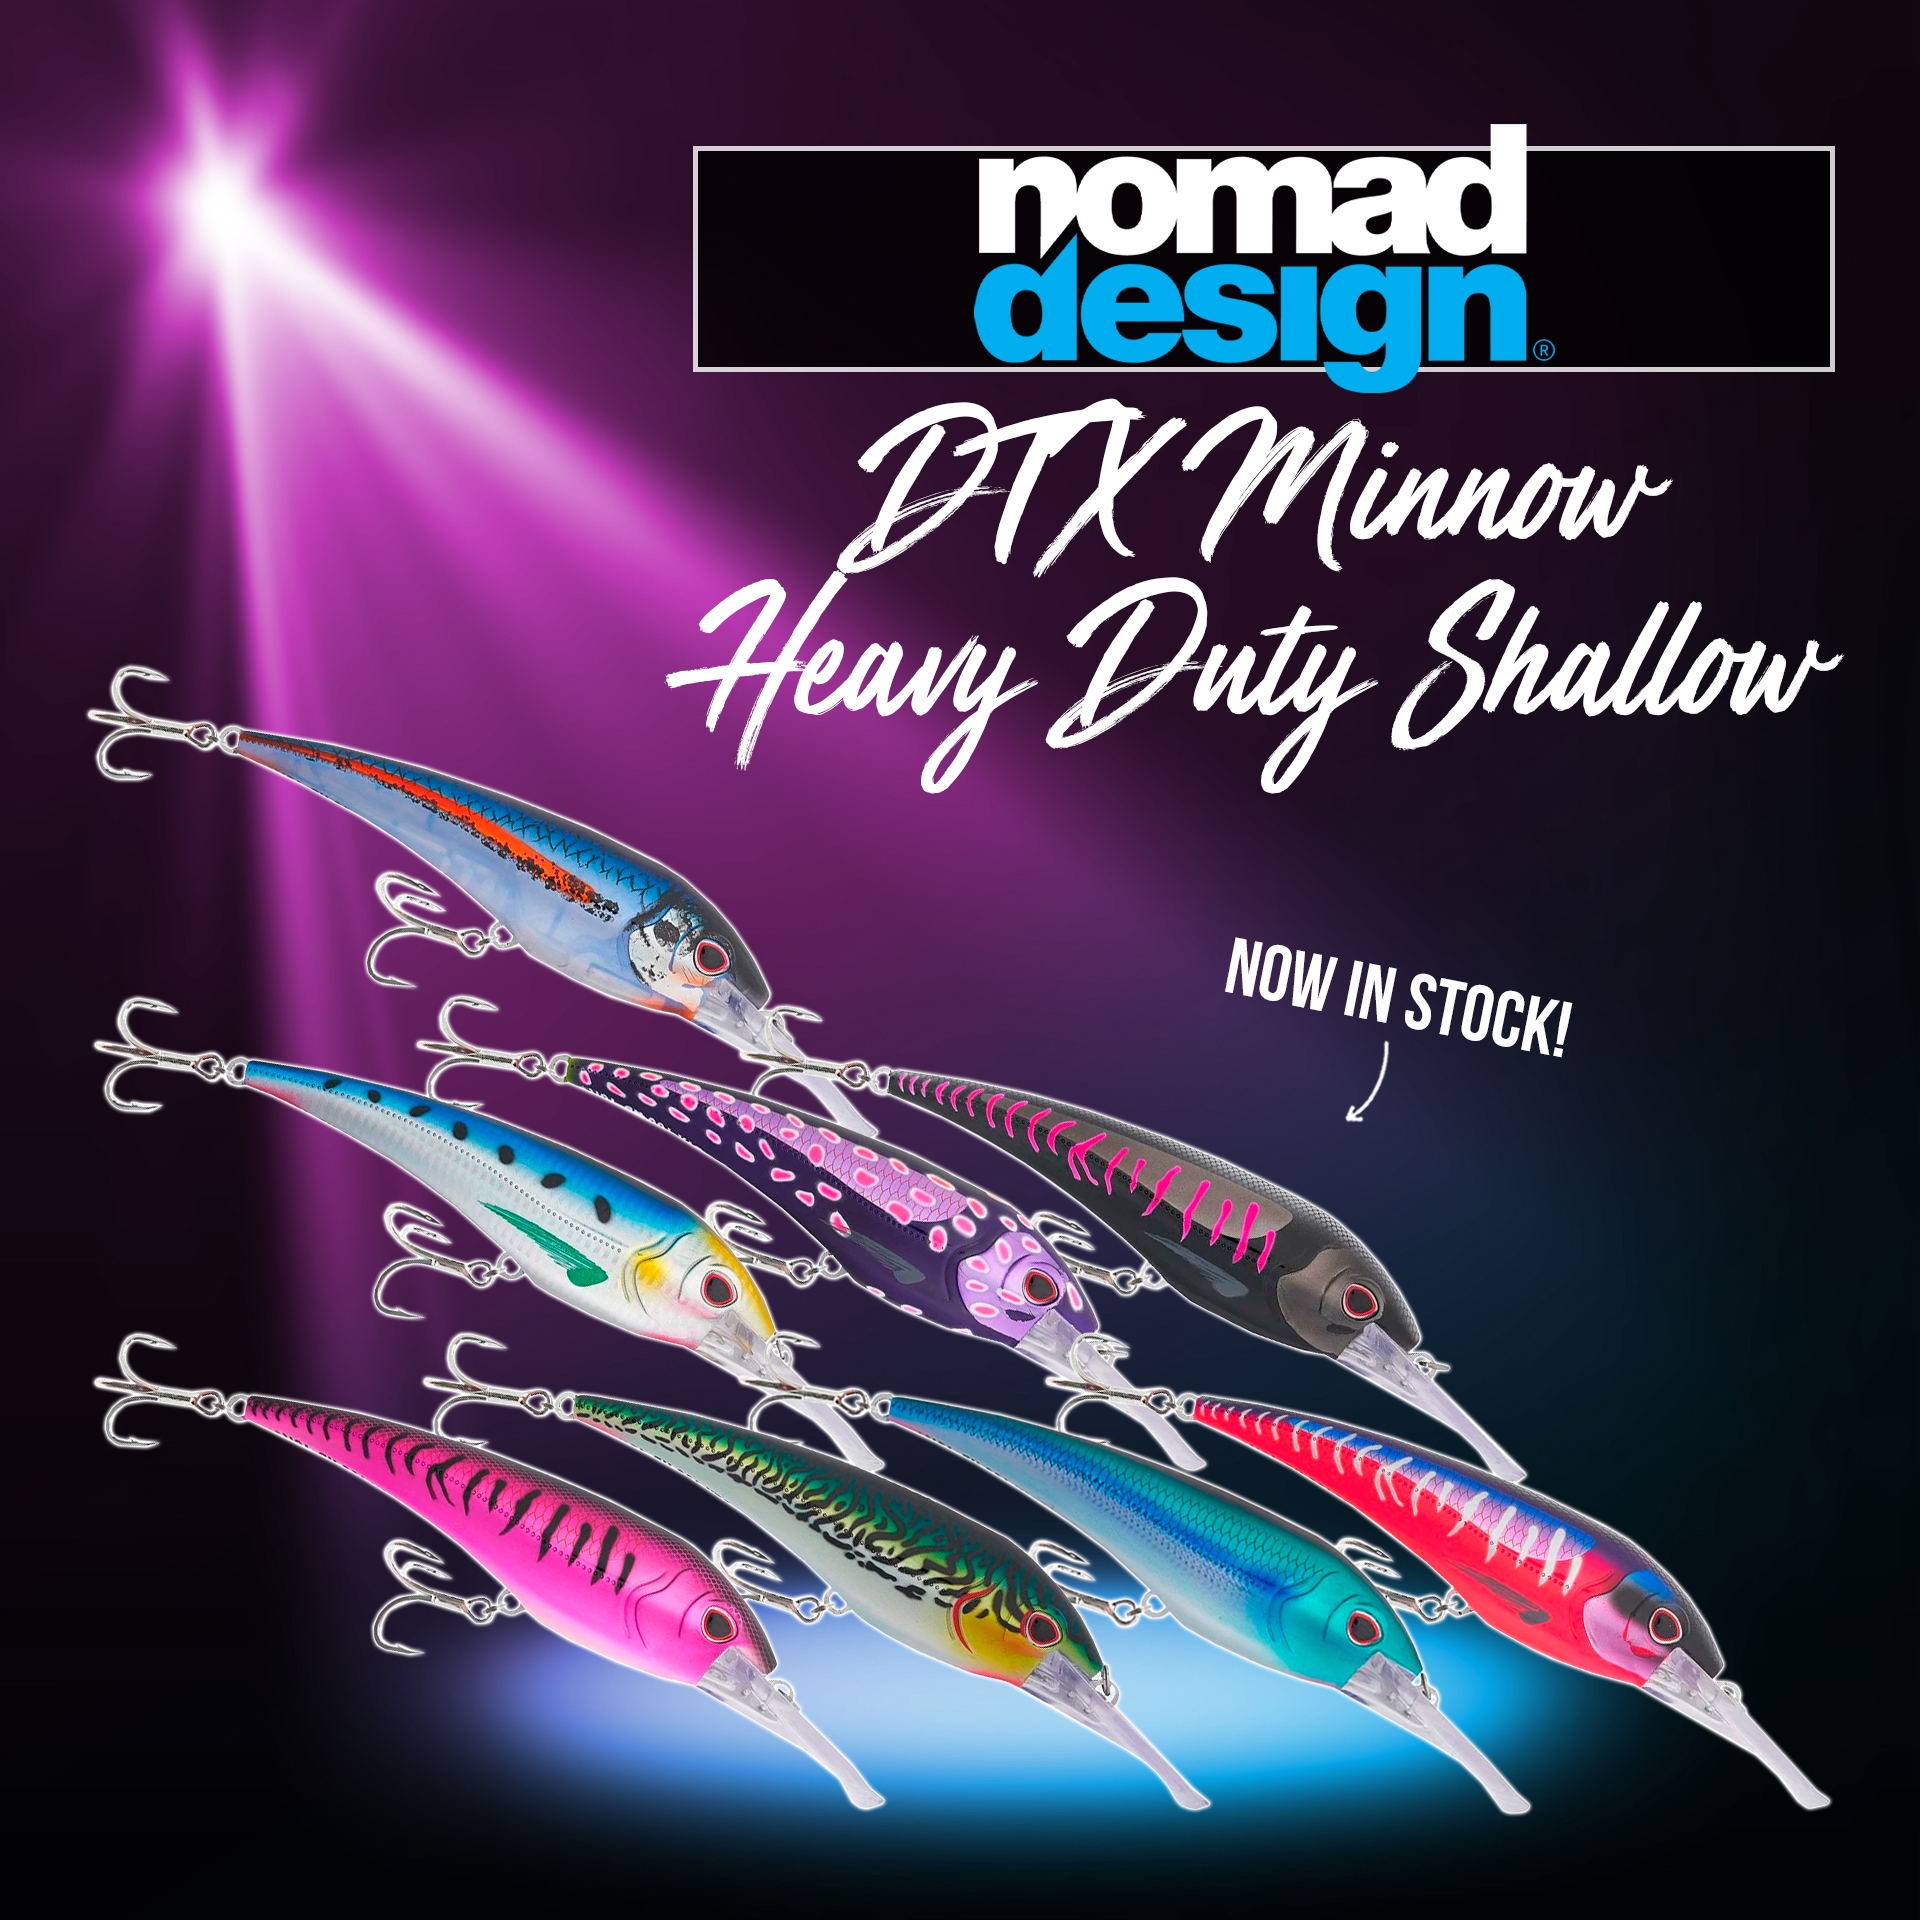 New - NOMAD DESIGN DTX MINNOW HEAVY DUTY SHALLOW FLOATING LURE